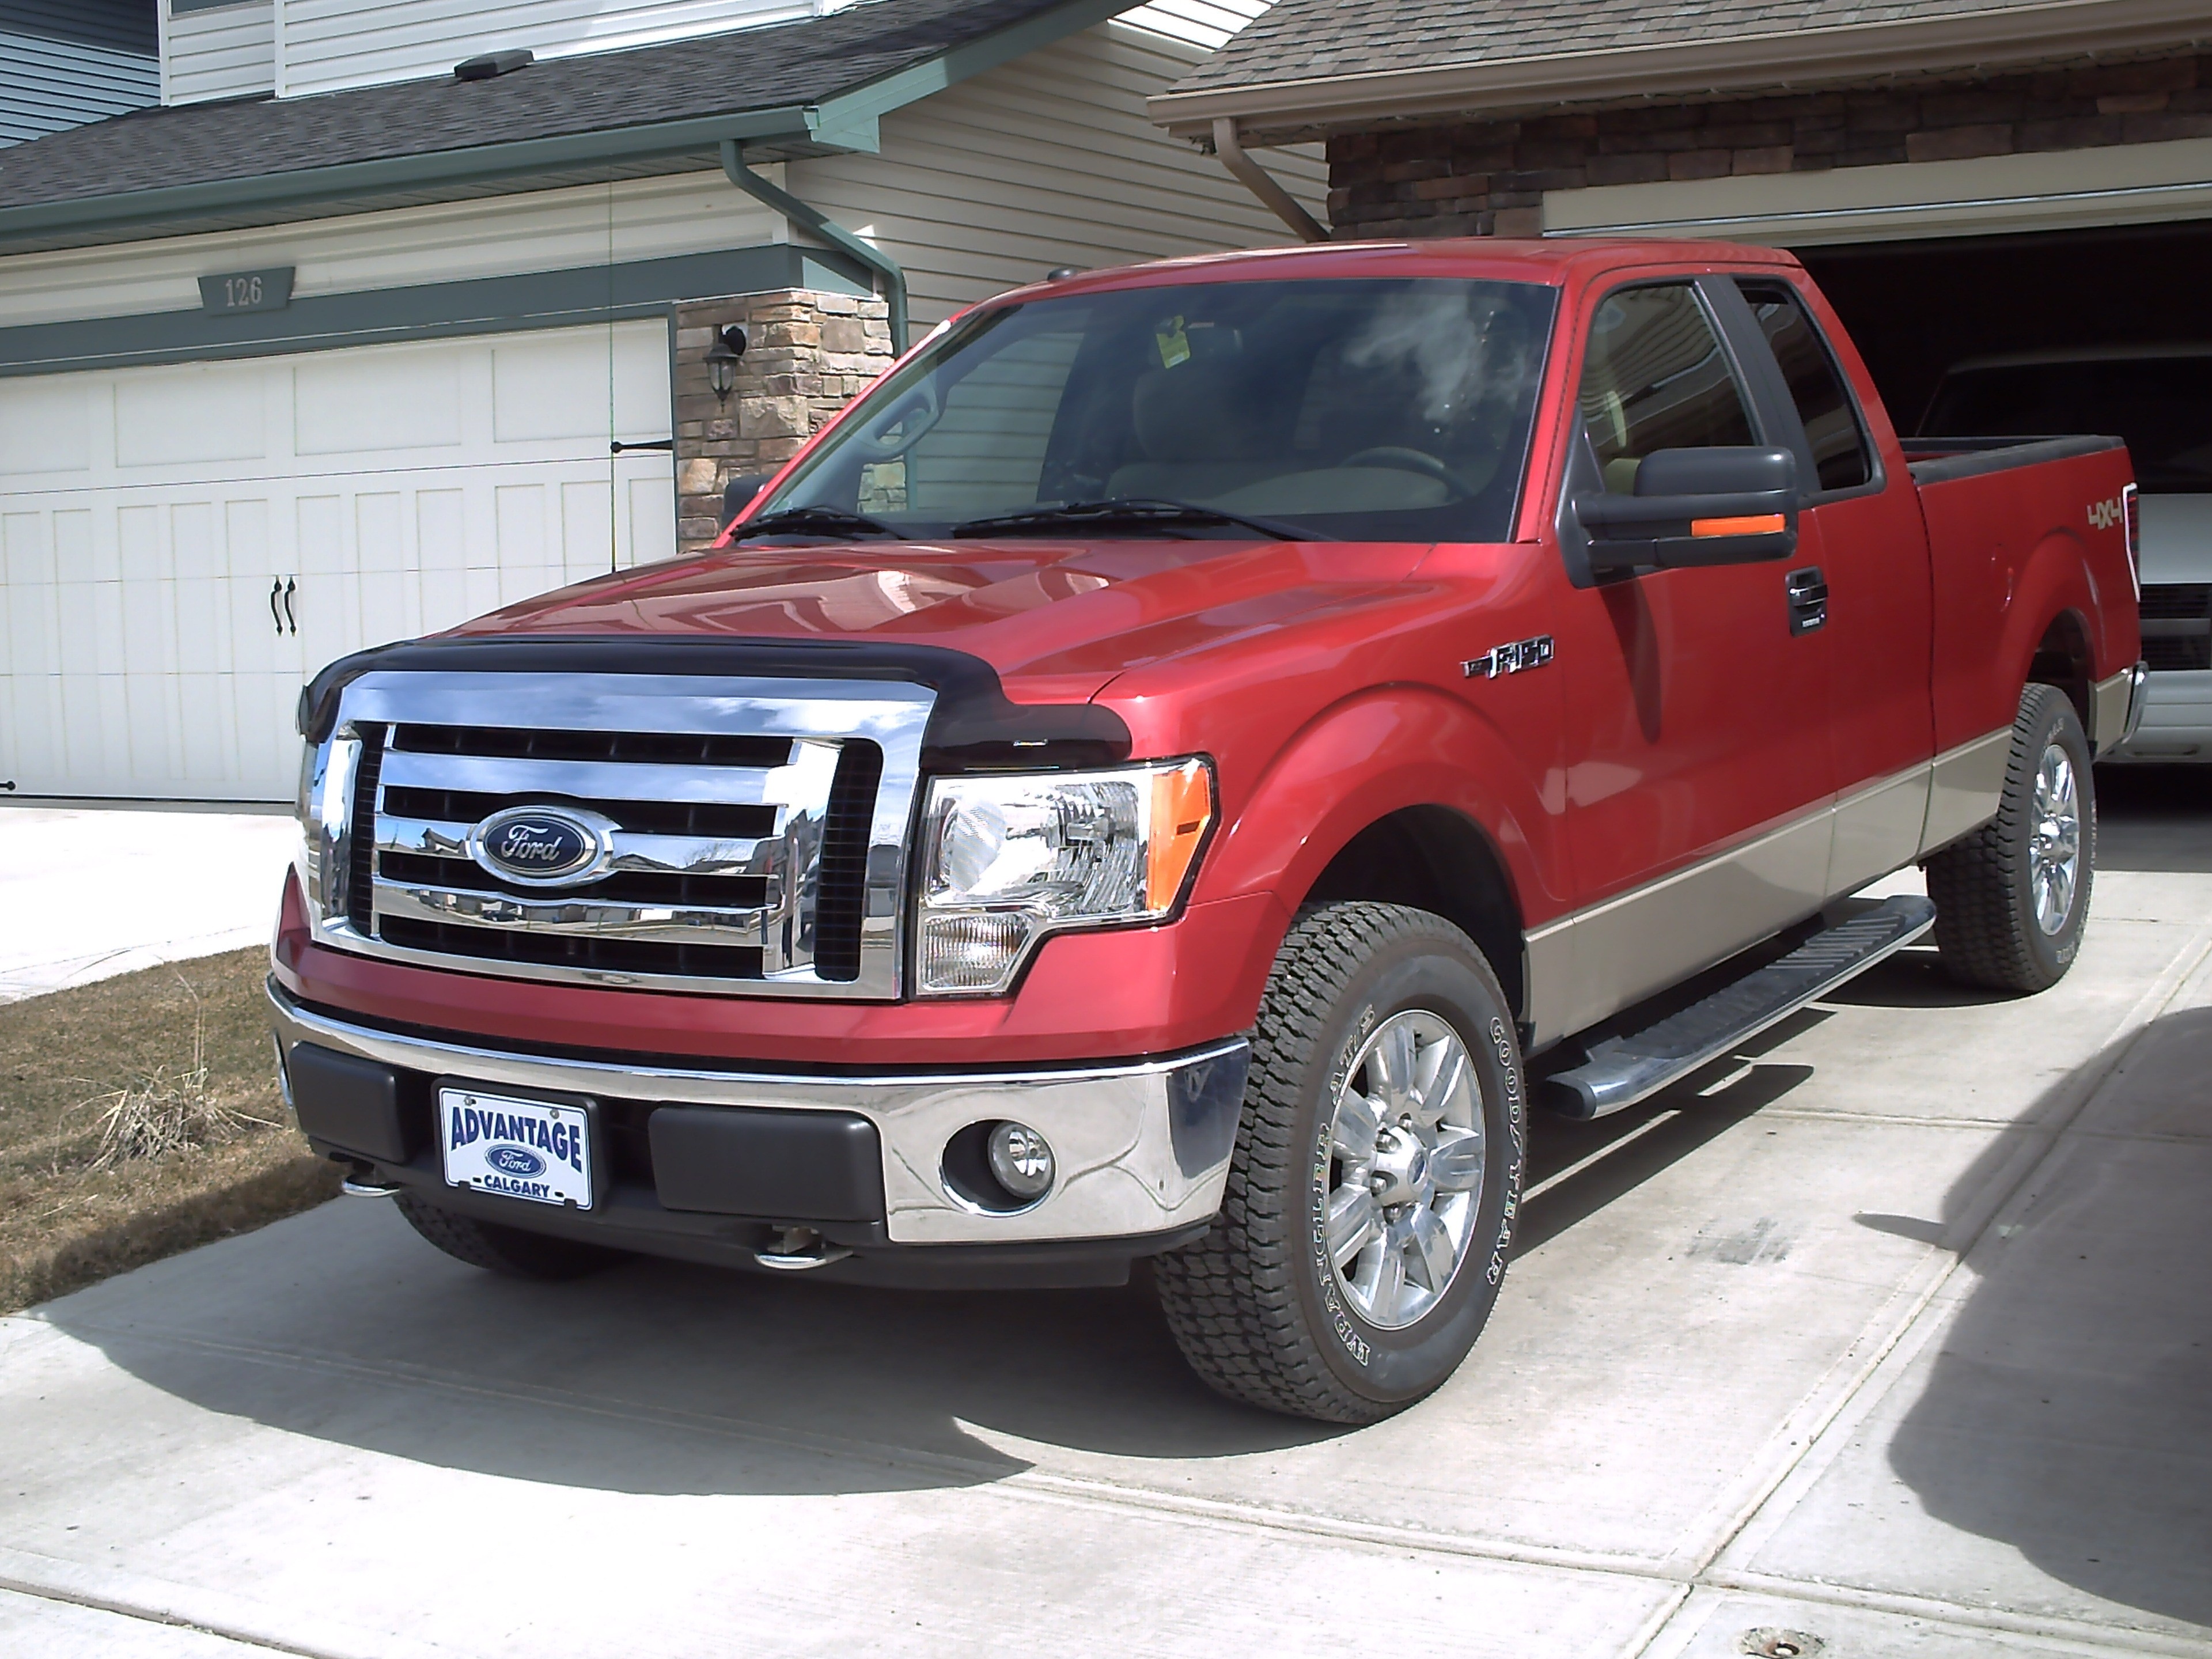 2009 FORD F-150